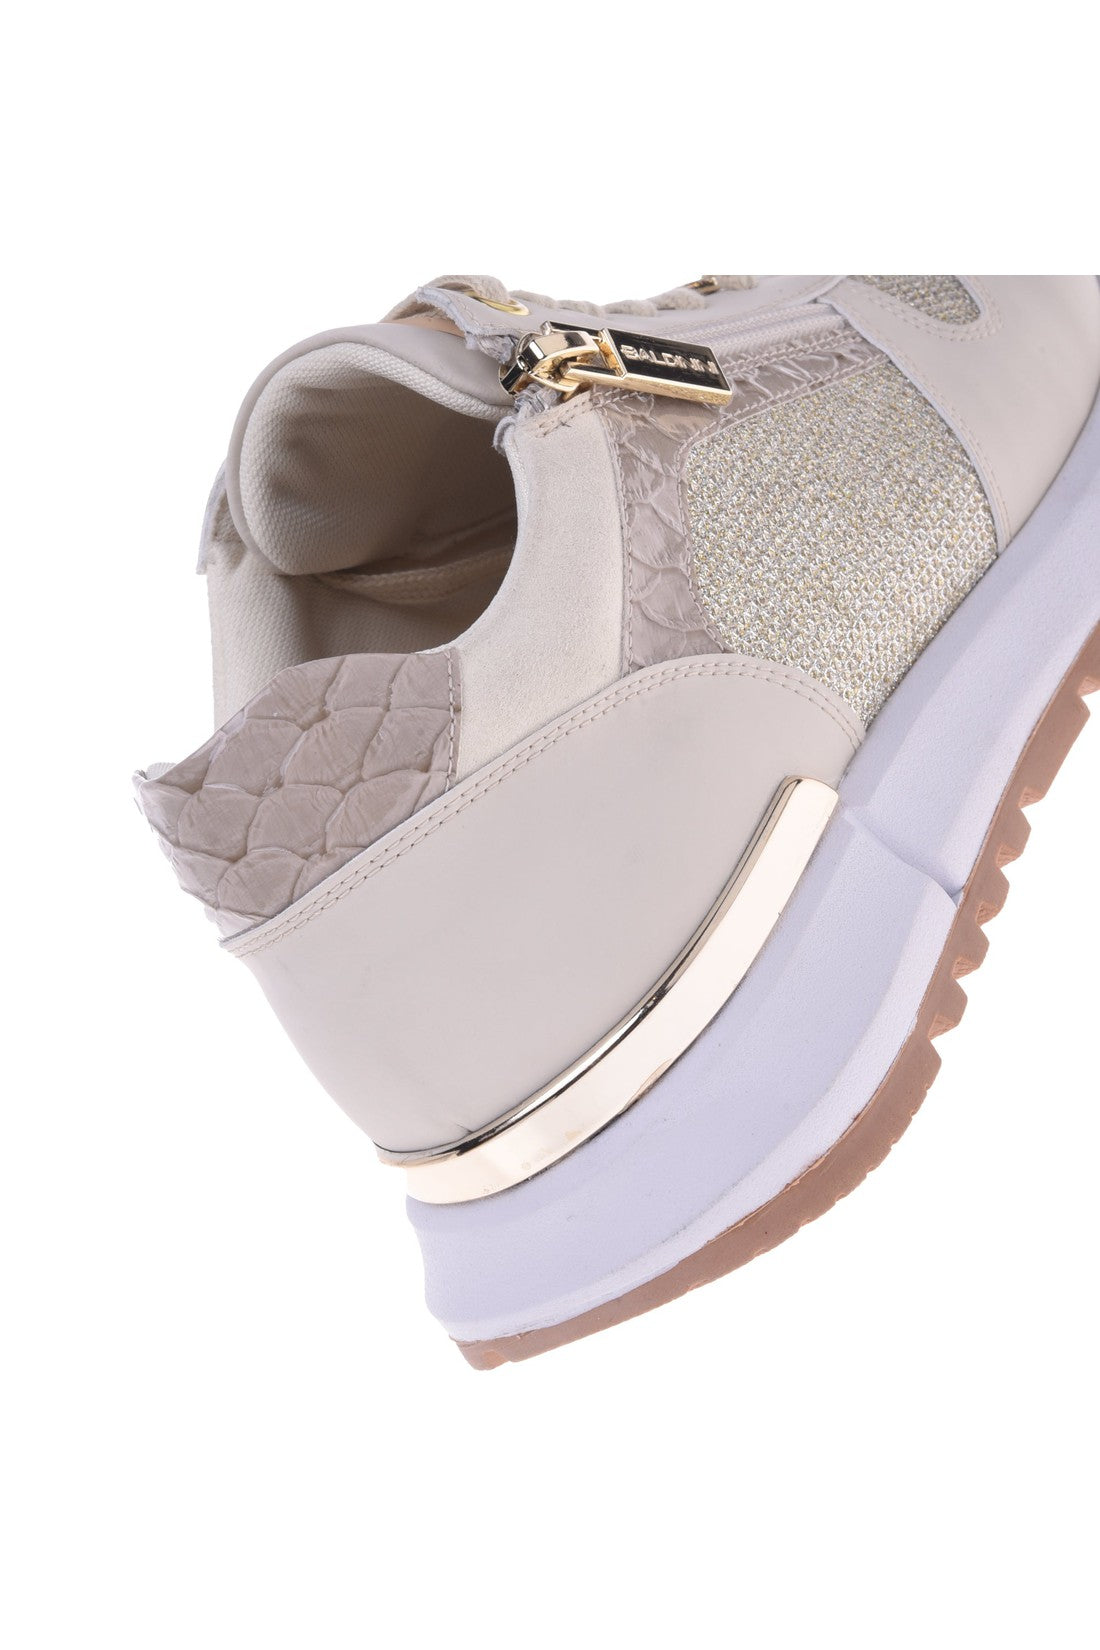 BALDININI-OUTLET-SALE-Sneaker-in-beige-and-platinum-nappa-leather-and-fabric-Sneaker-ARCHIVE-COLLECTION-4.jpg